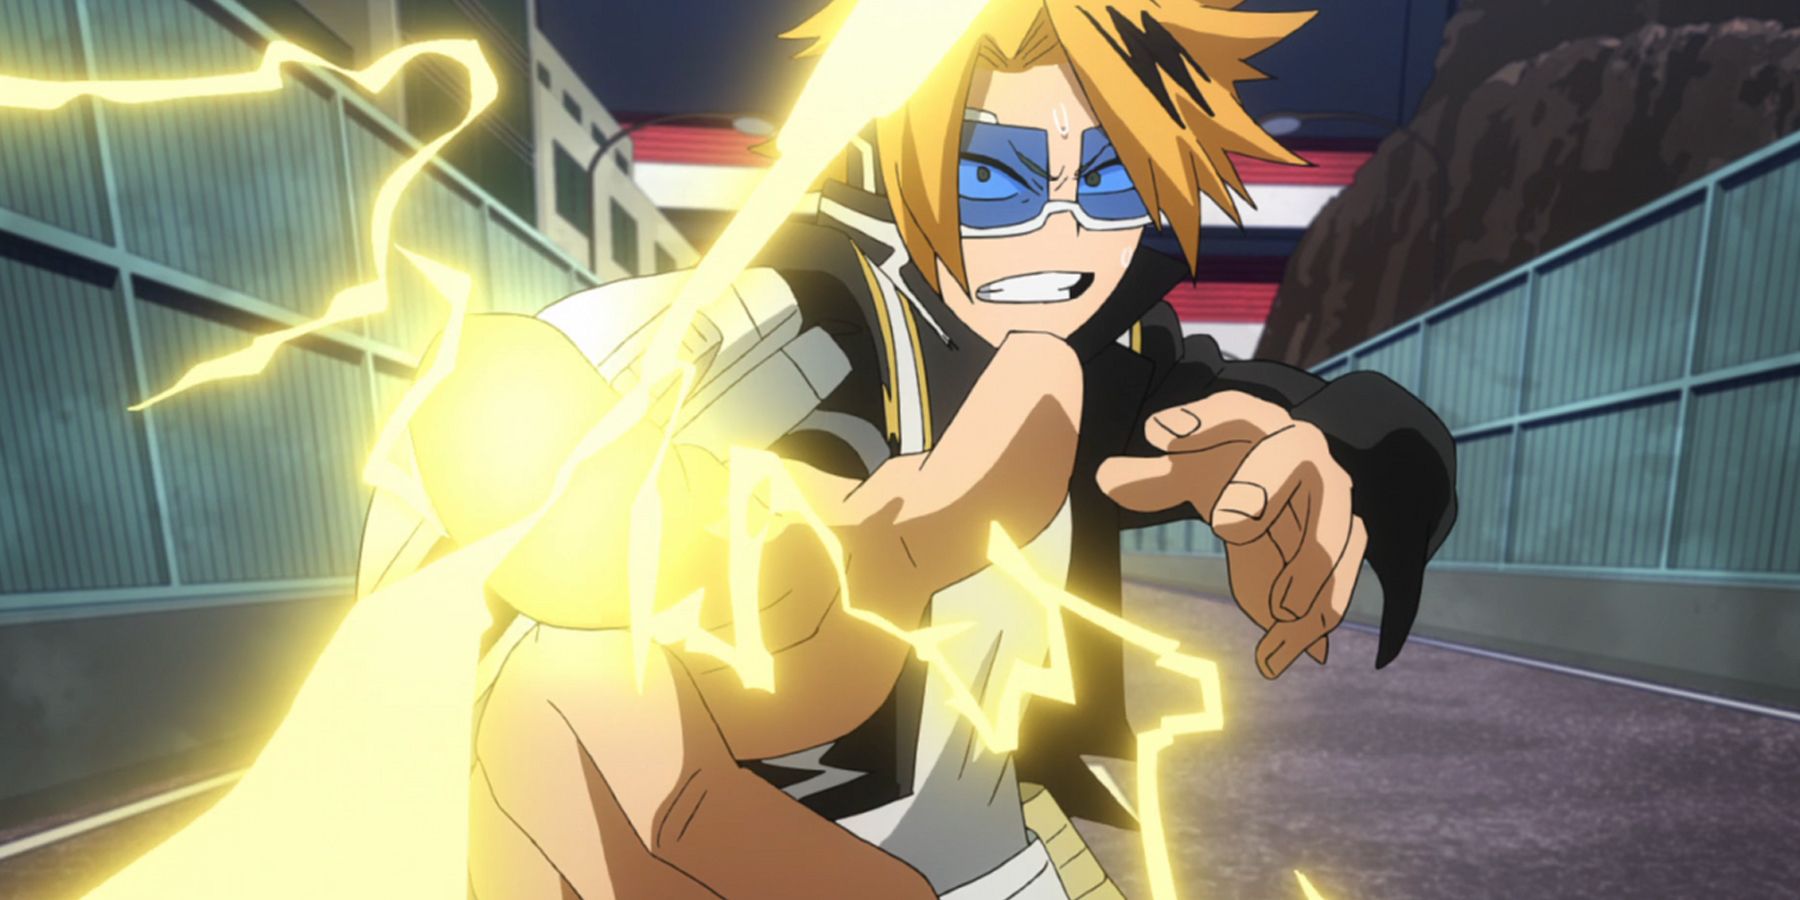 Chargebolt shooting a bolt of electricity with his Electrification Quirk in My Hero Academia